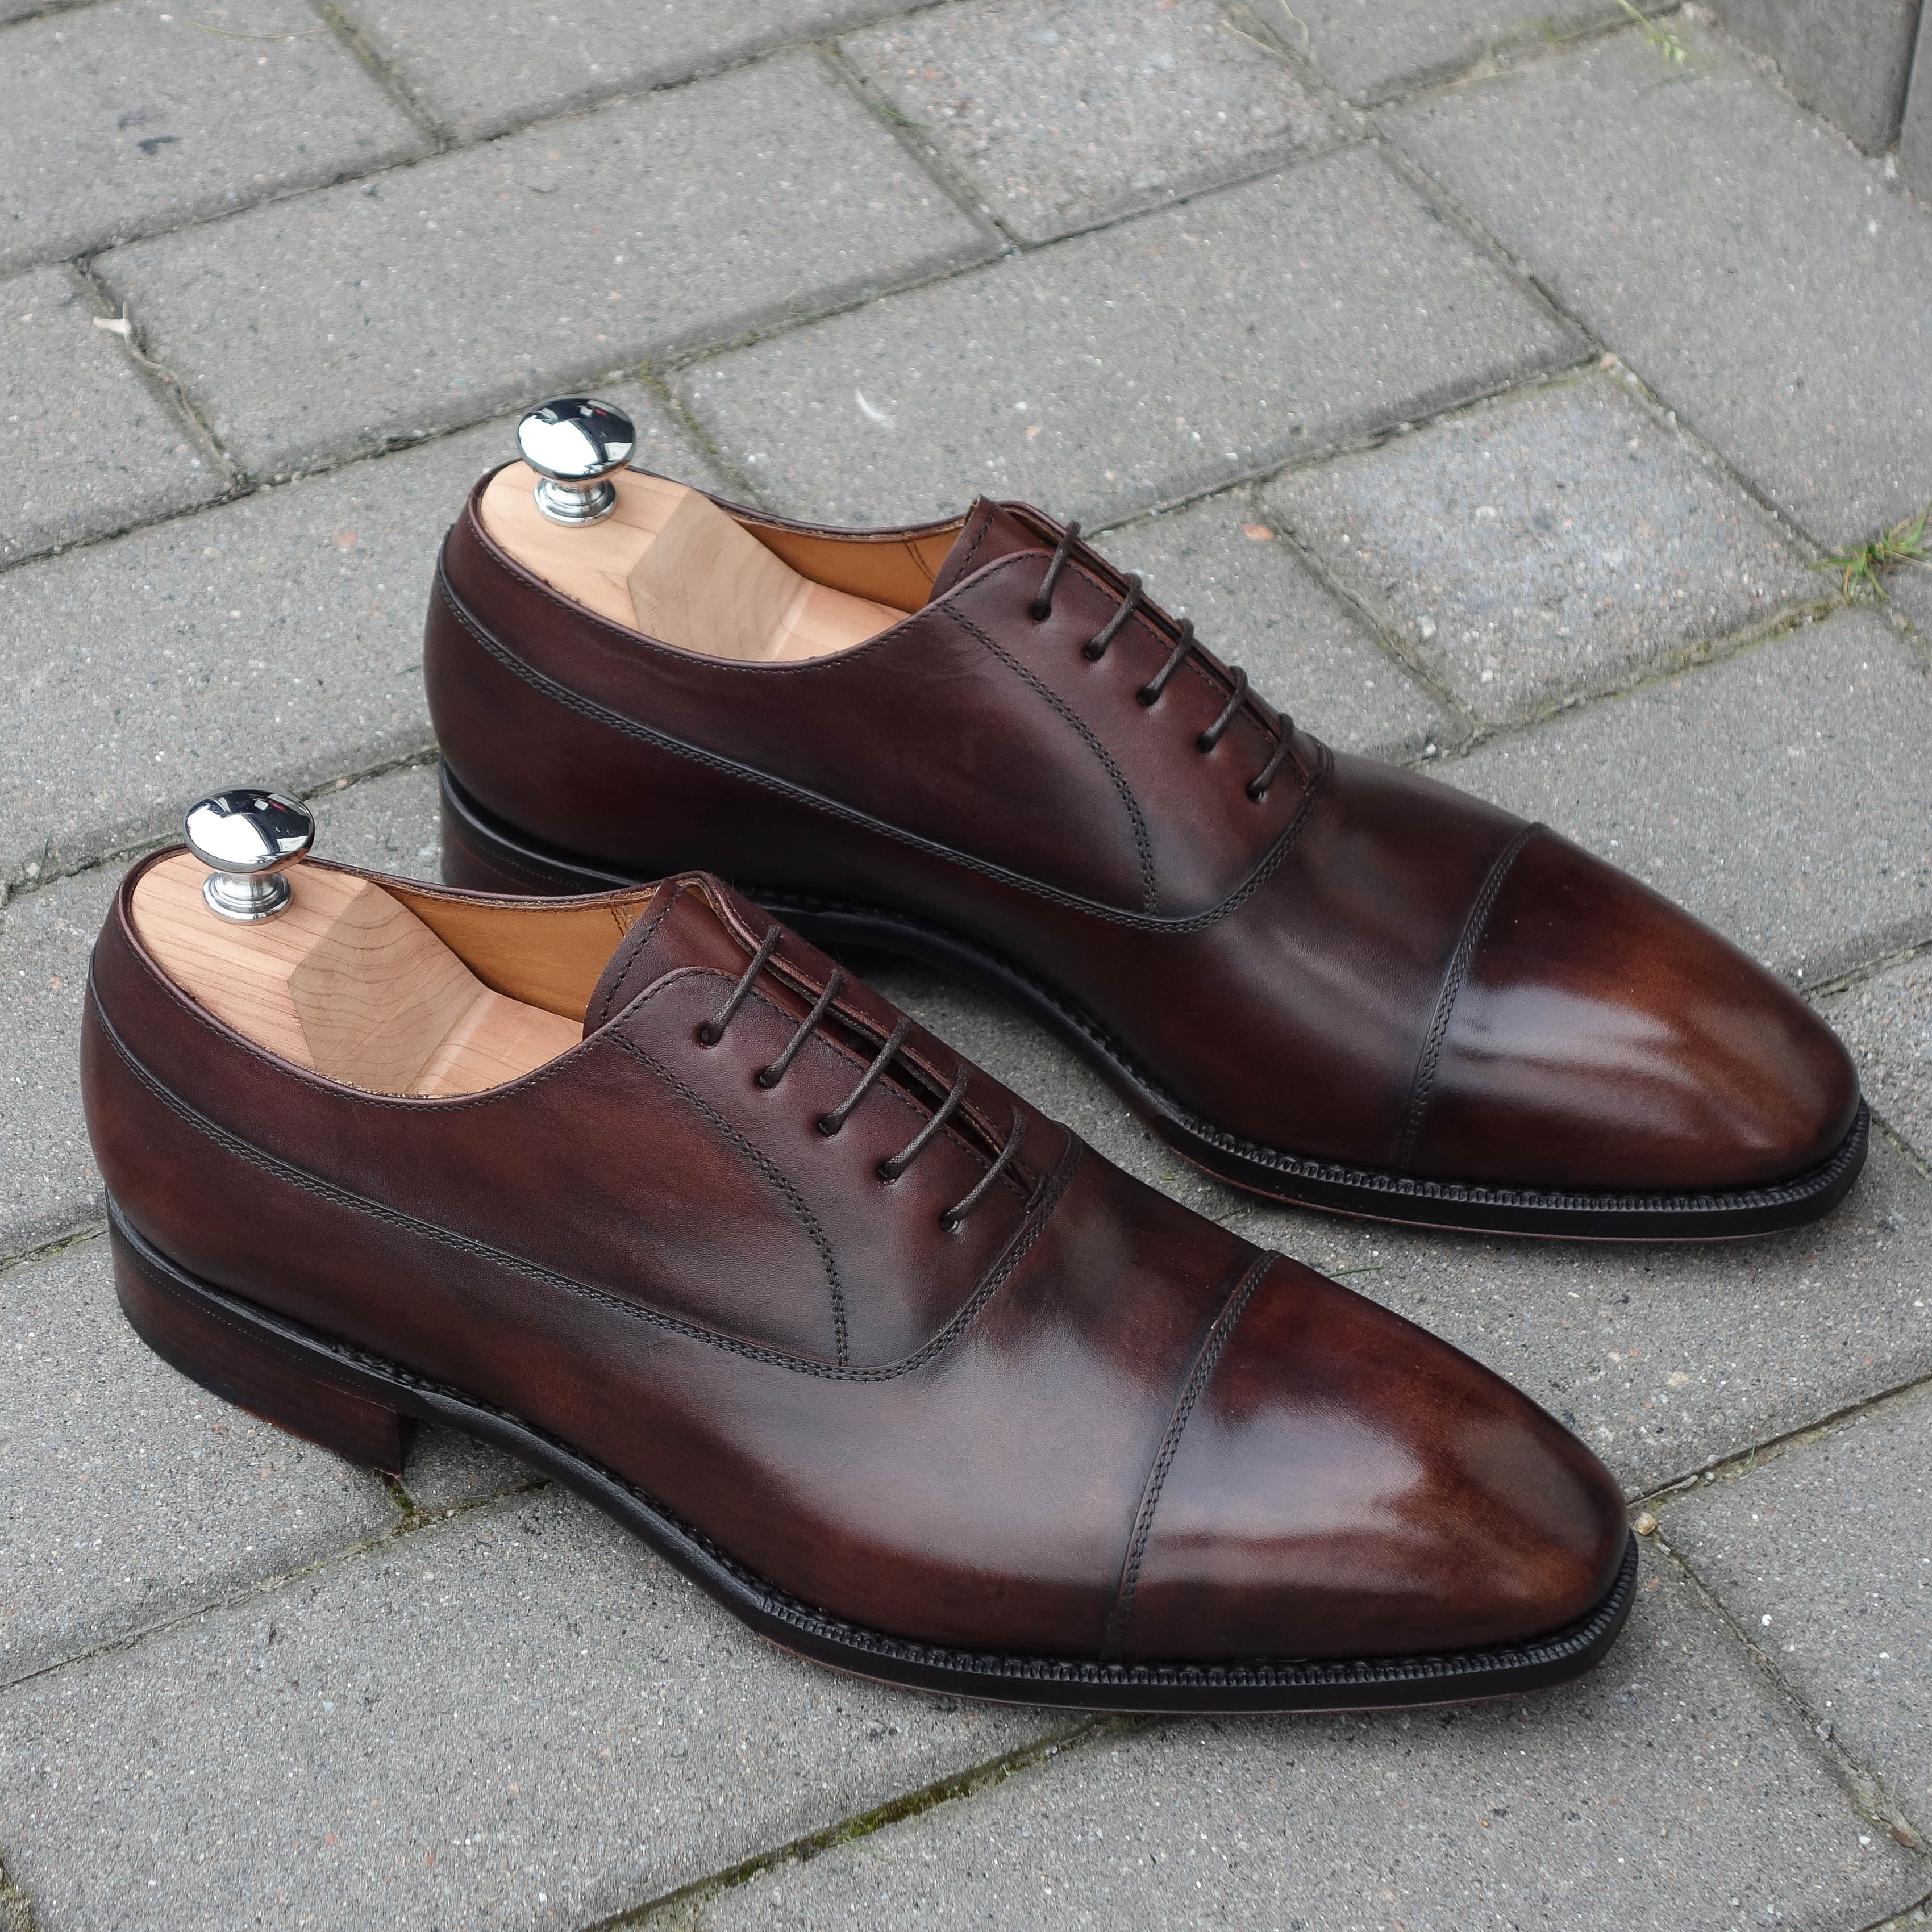 Cap toe balmoral oxford - new model in our stock collection